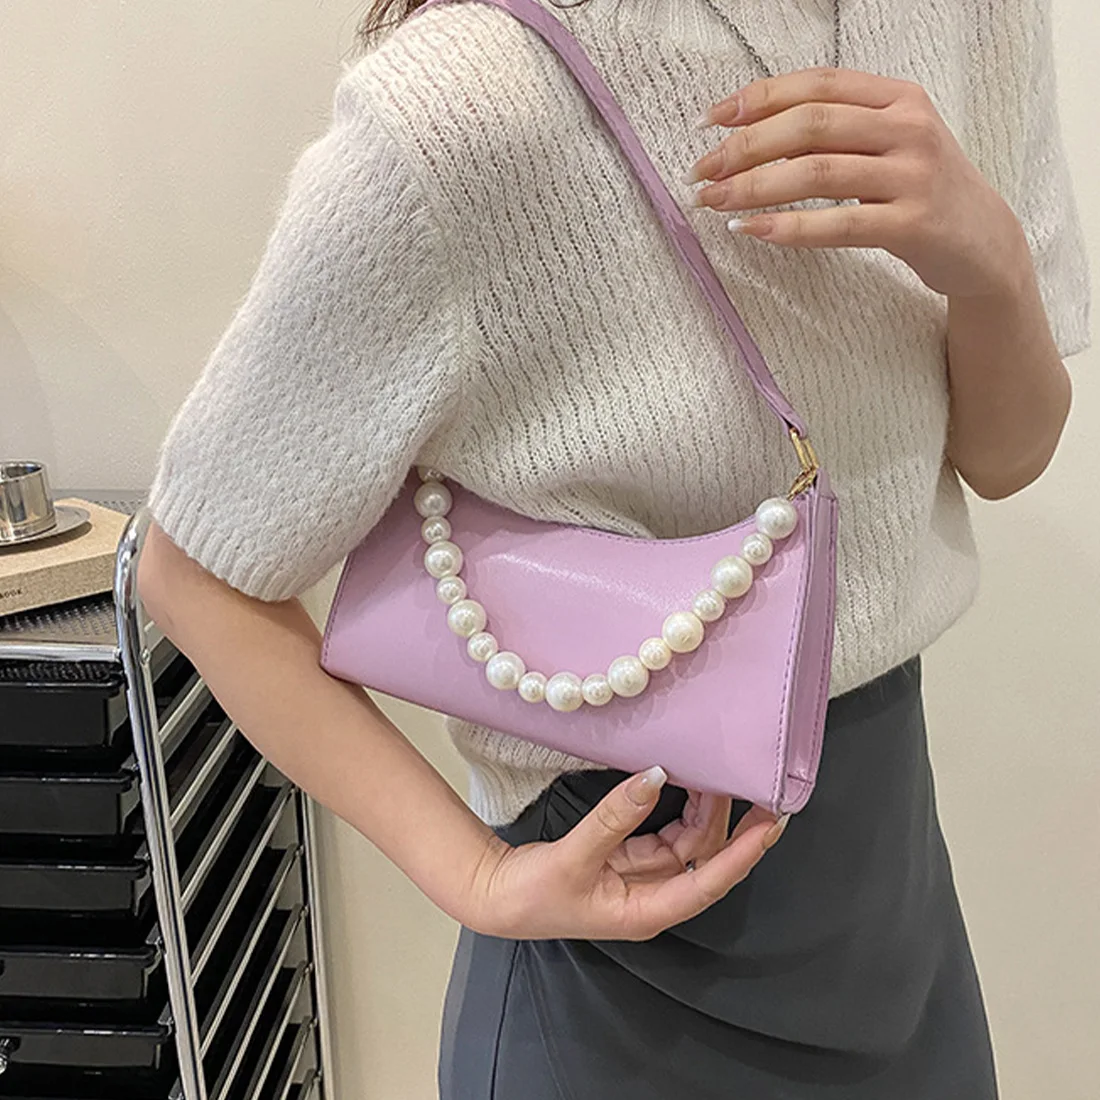 

Fashion Exquisite Shopping Bag Casual Women Totes Shoulder Bags Female Leather Solid Color Chain Handbag For Women